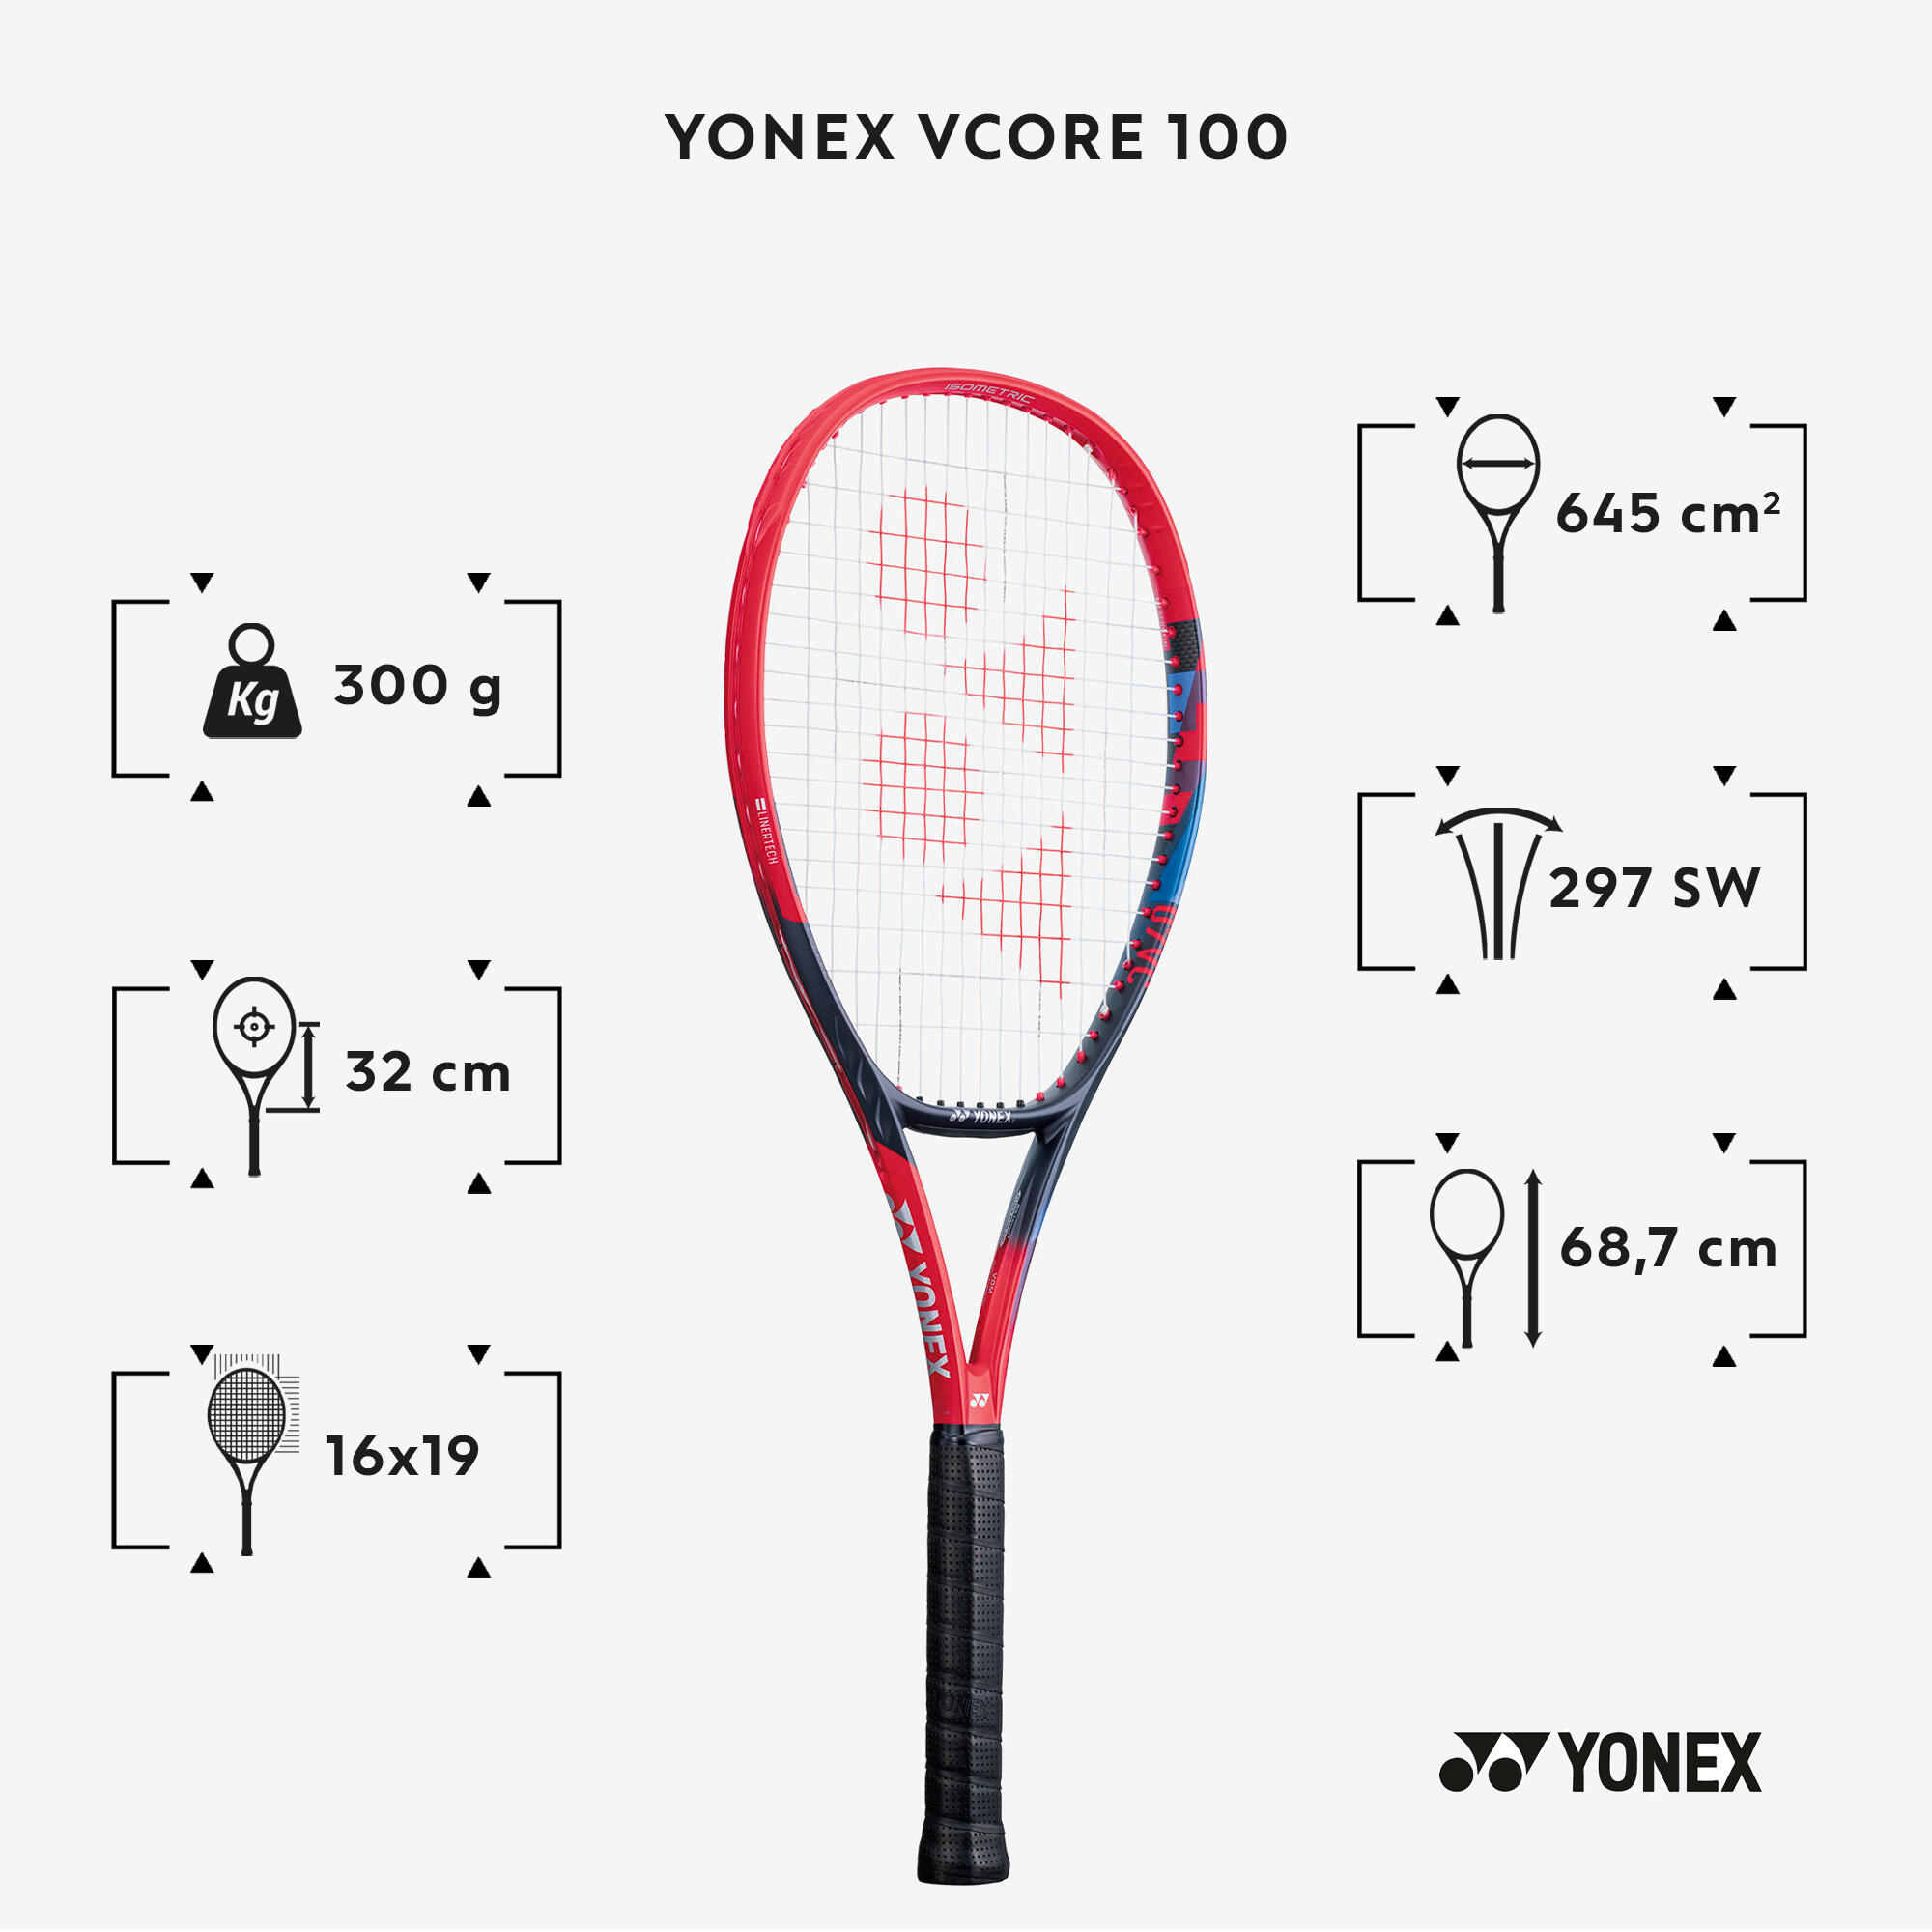 Adult Tennis Racket VCore 100 300g - Red 2/2